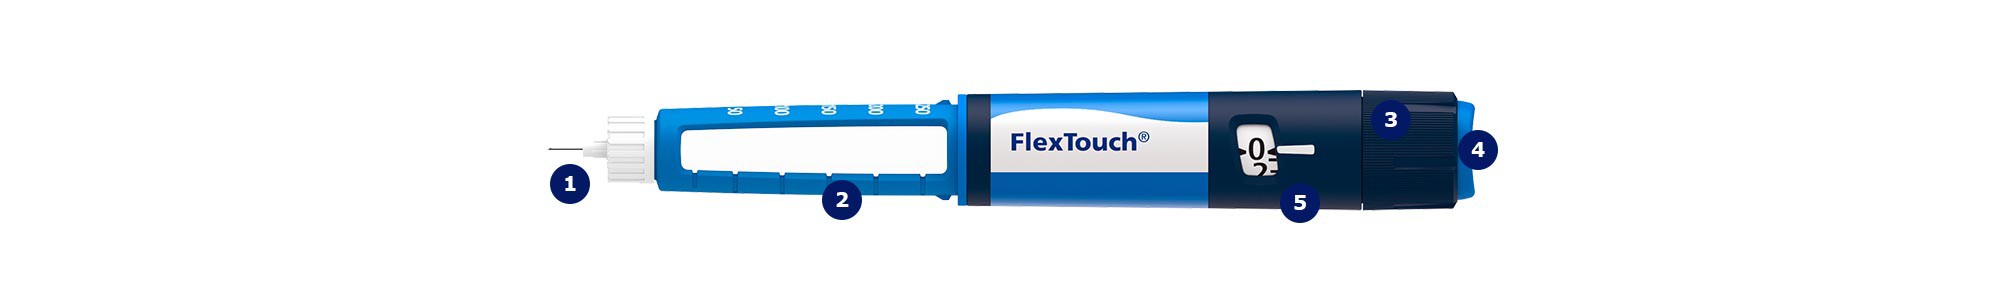 Parts of a FlexTouch® illustration